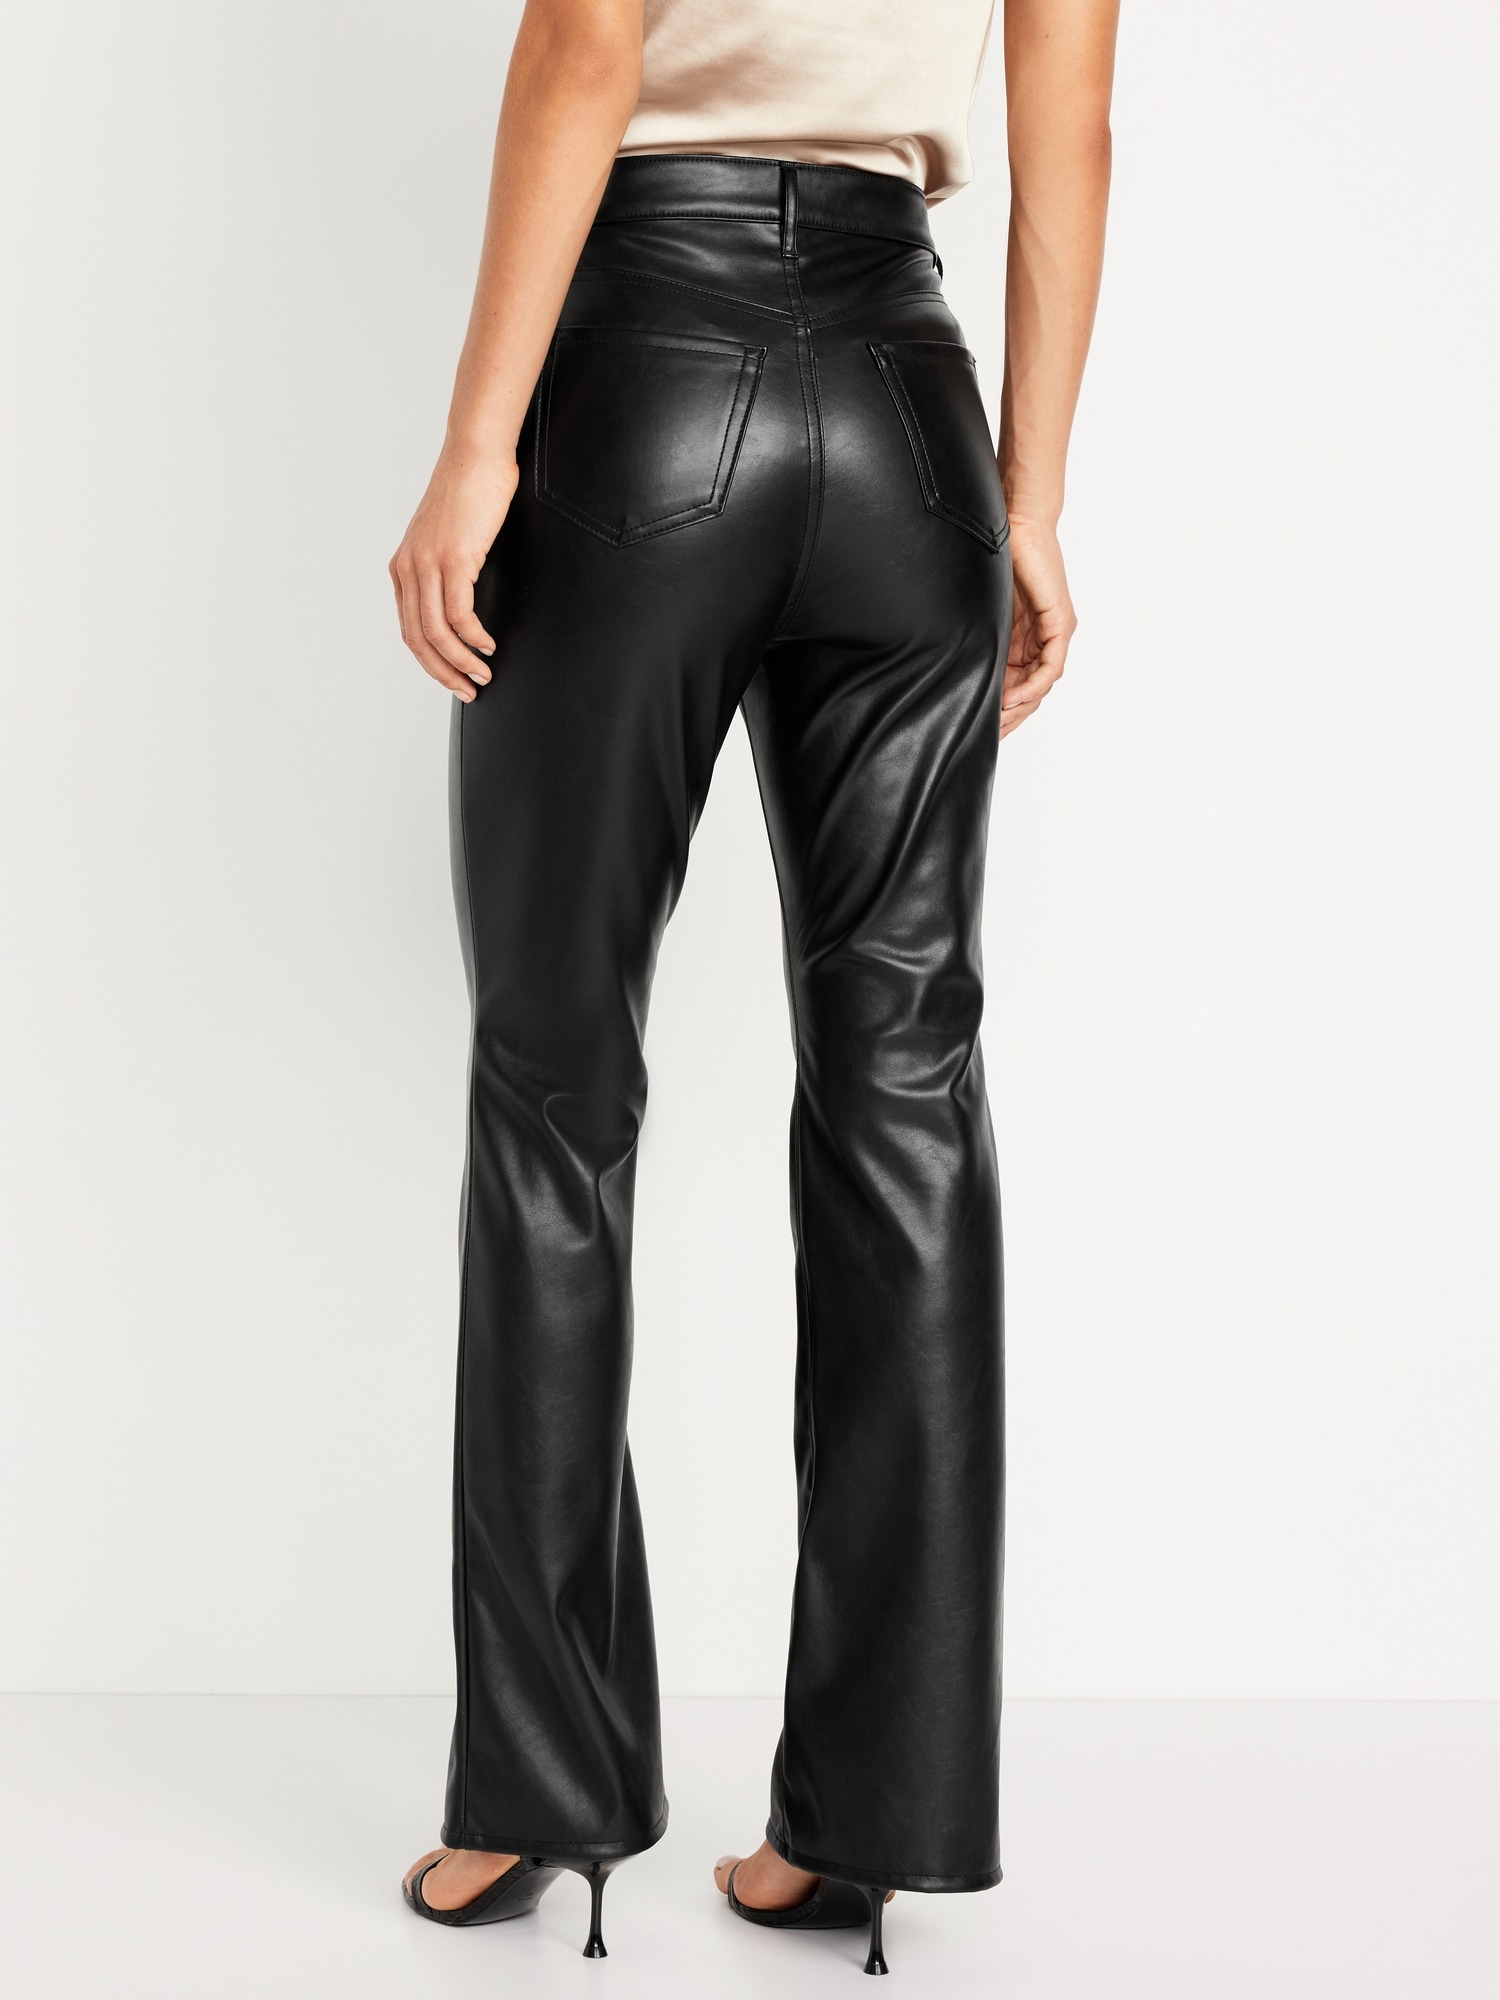 Faux Leather High-waisted Flare Leg Pants